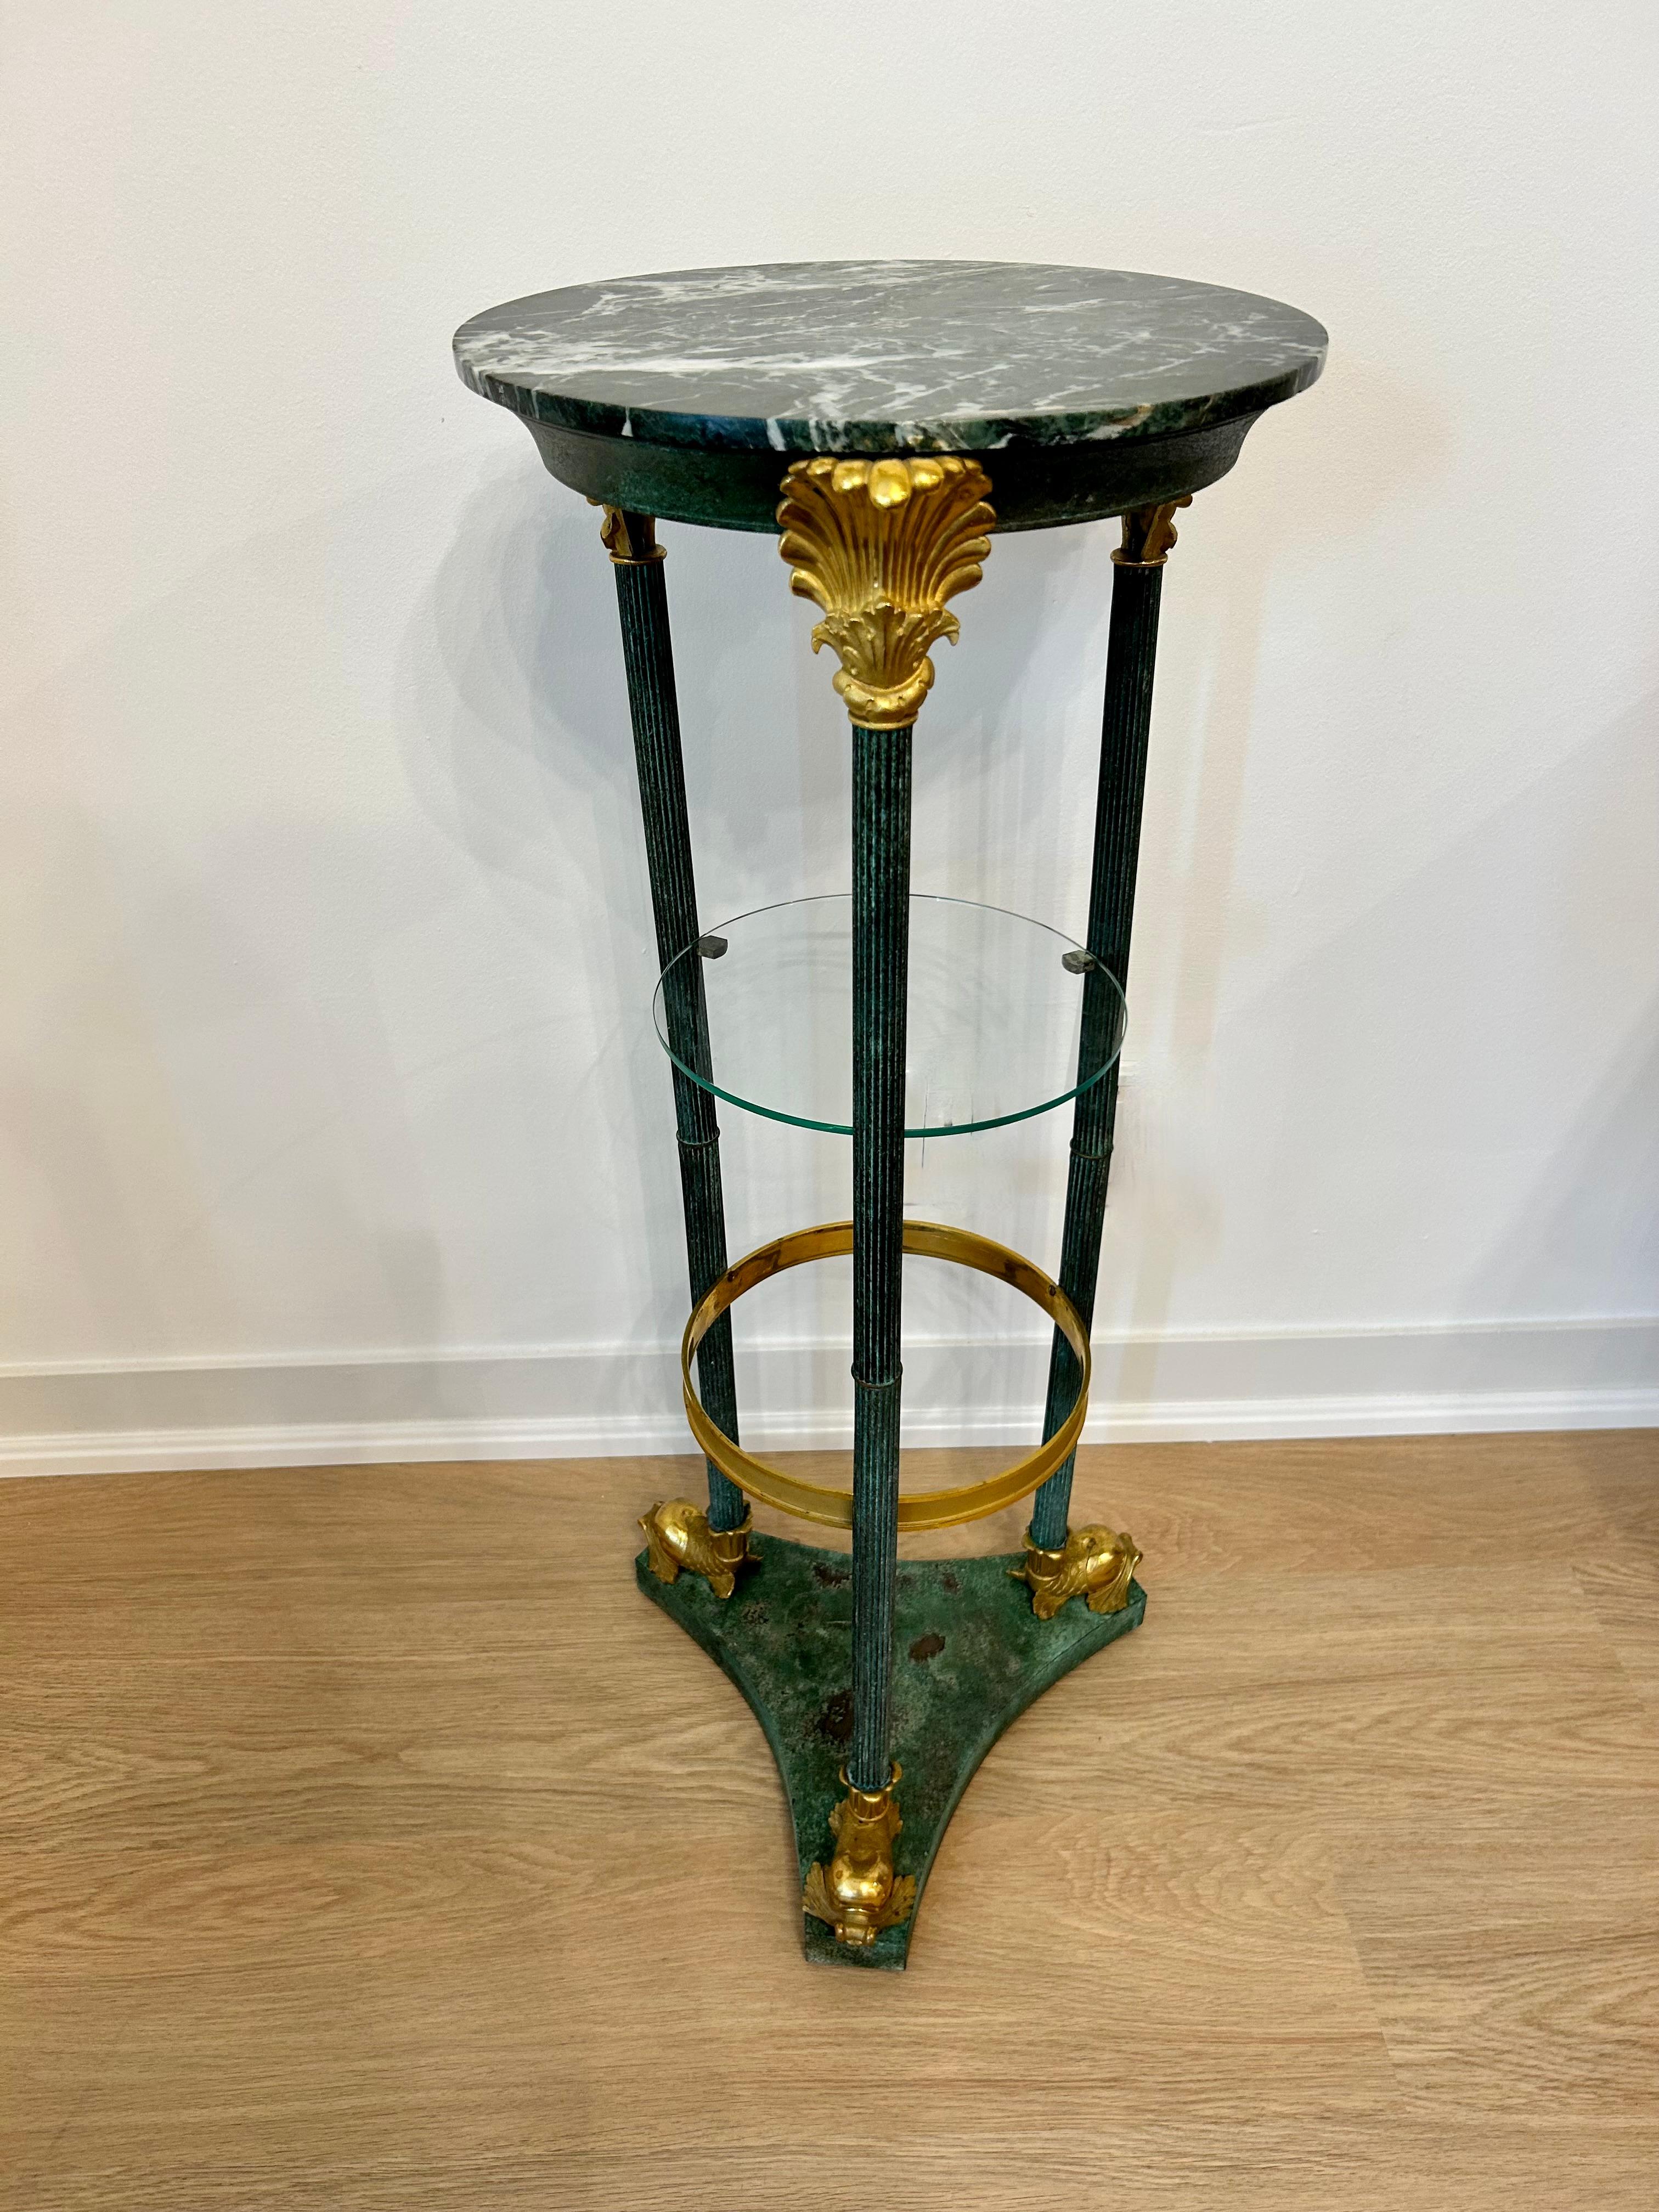 19th Century patinated metal pedestal table with three legs and a triangular base in verdigris finish. Gilt  gilt bronze dolphin feet, floral capitals and an interior ring. The top is green marble, and there is a lower glass shelf. Both of these may